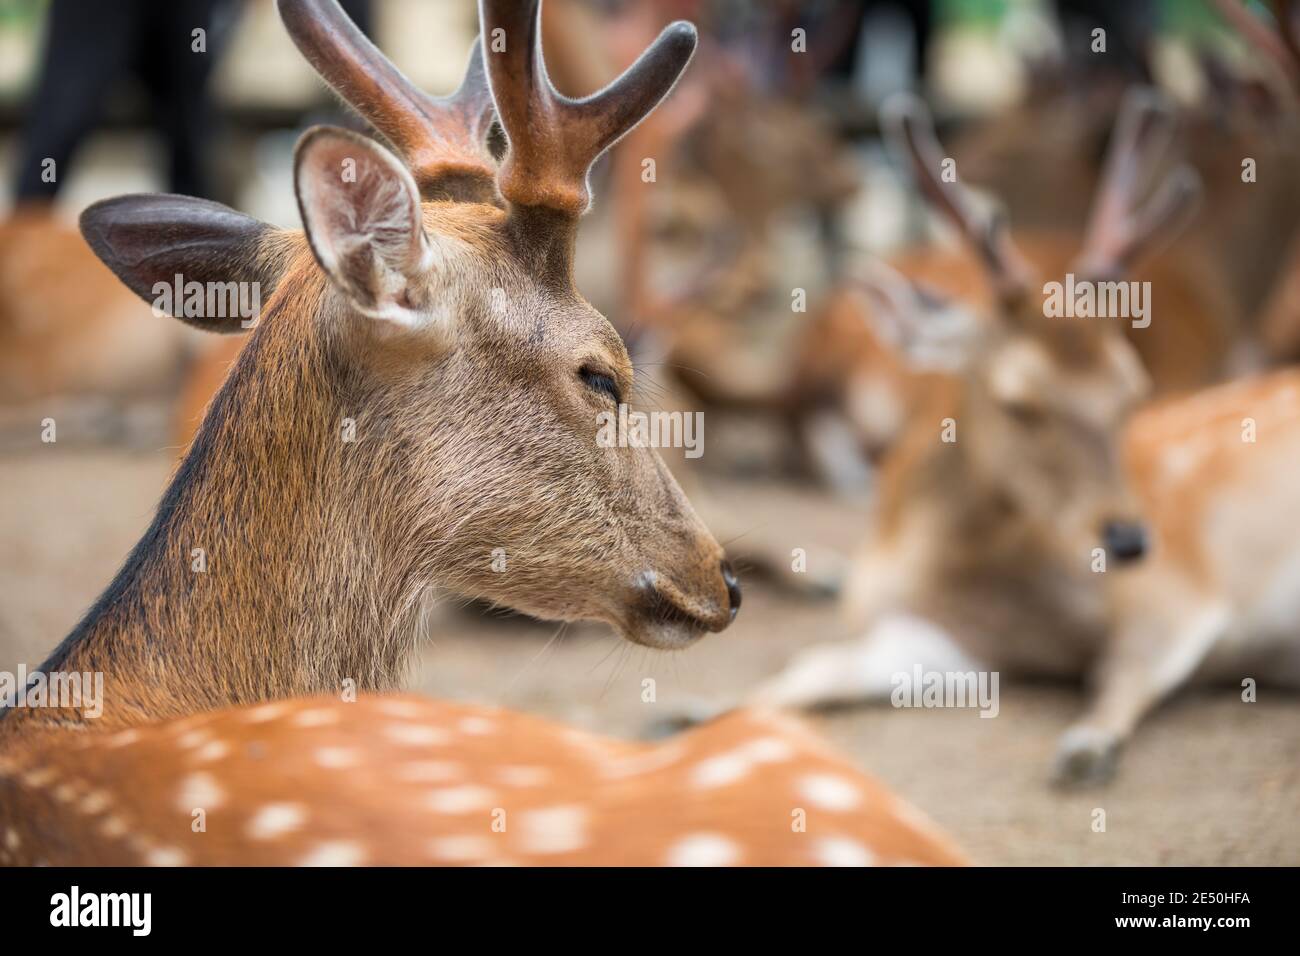 Close up of a wild male deer resting with its eyes closed, among other deers Stock Photo